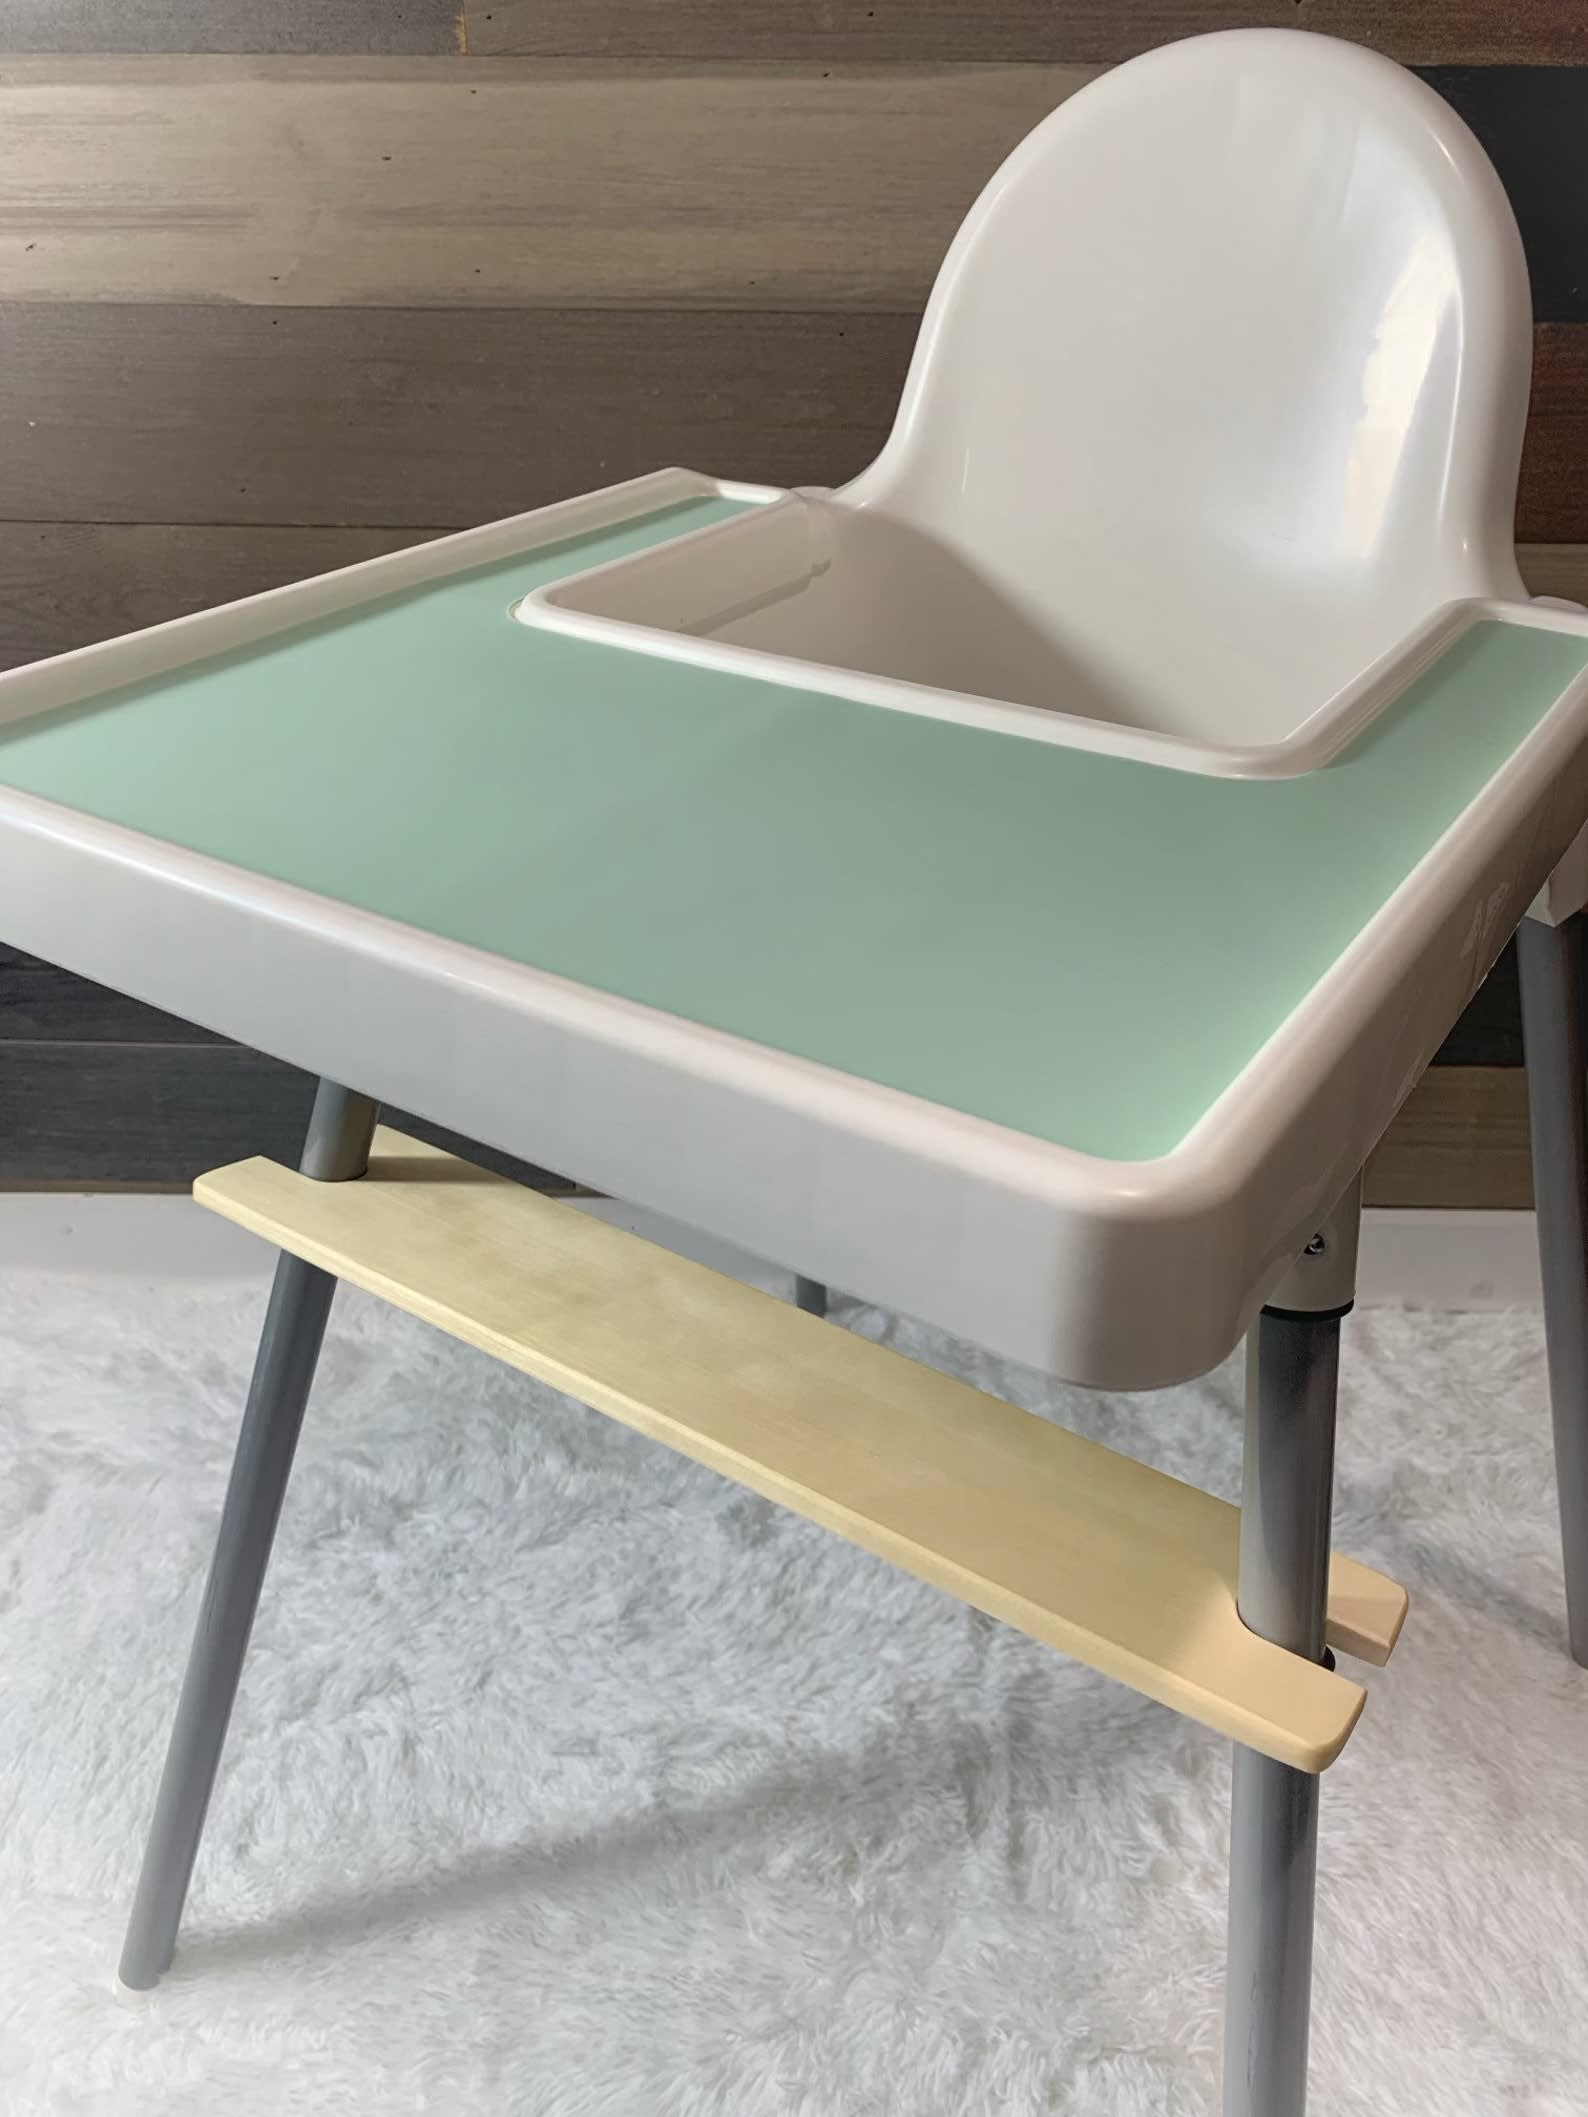 https://cdn.apartmenttherapy.info/image/upload/v1676645636/gen-workflow/product-database/ikea-high-chair-foot-rest.jpg